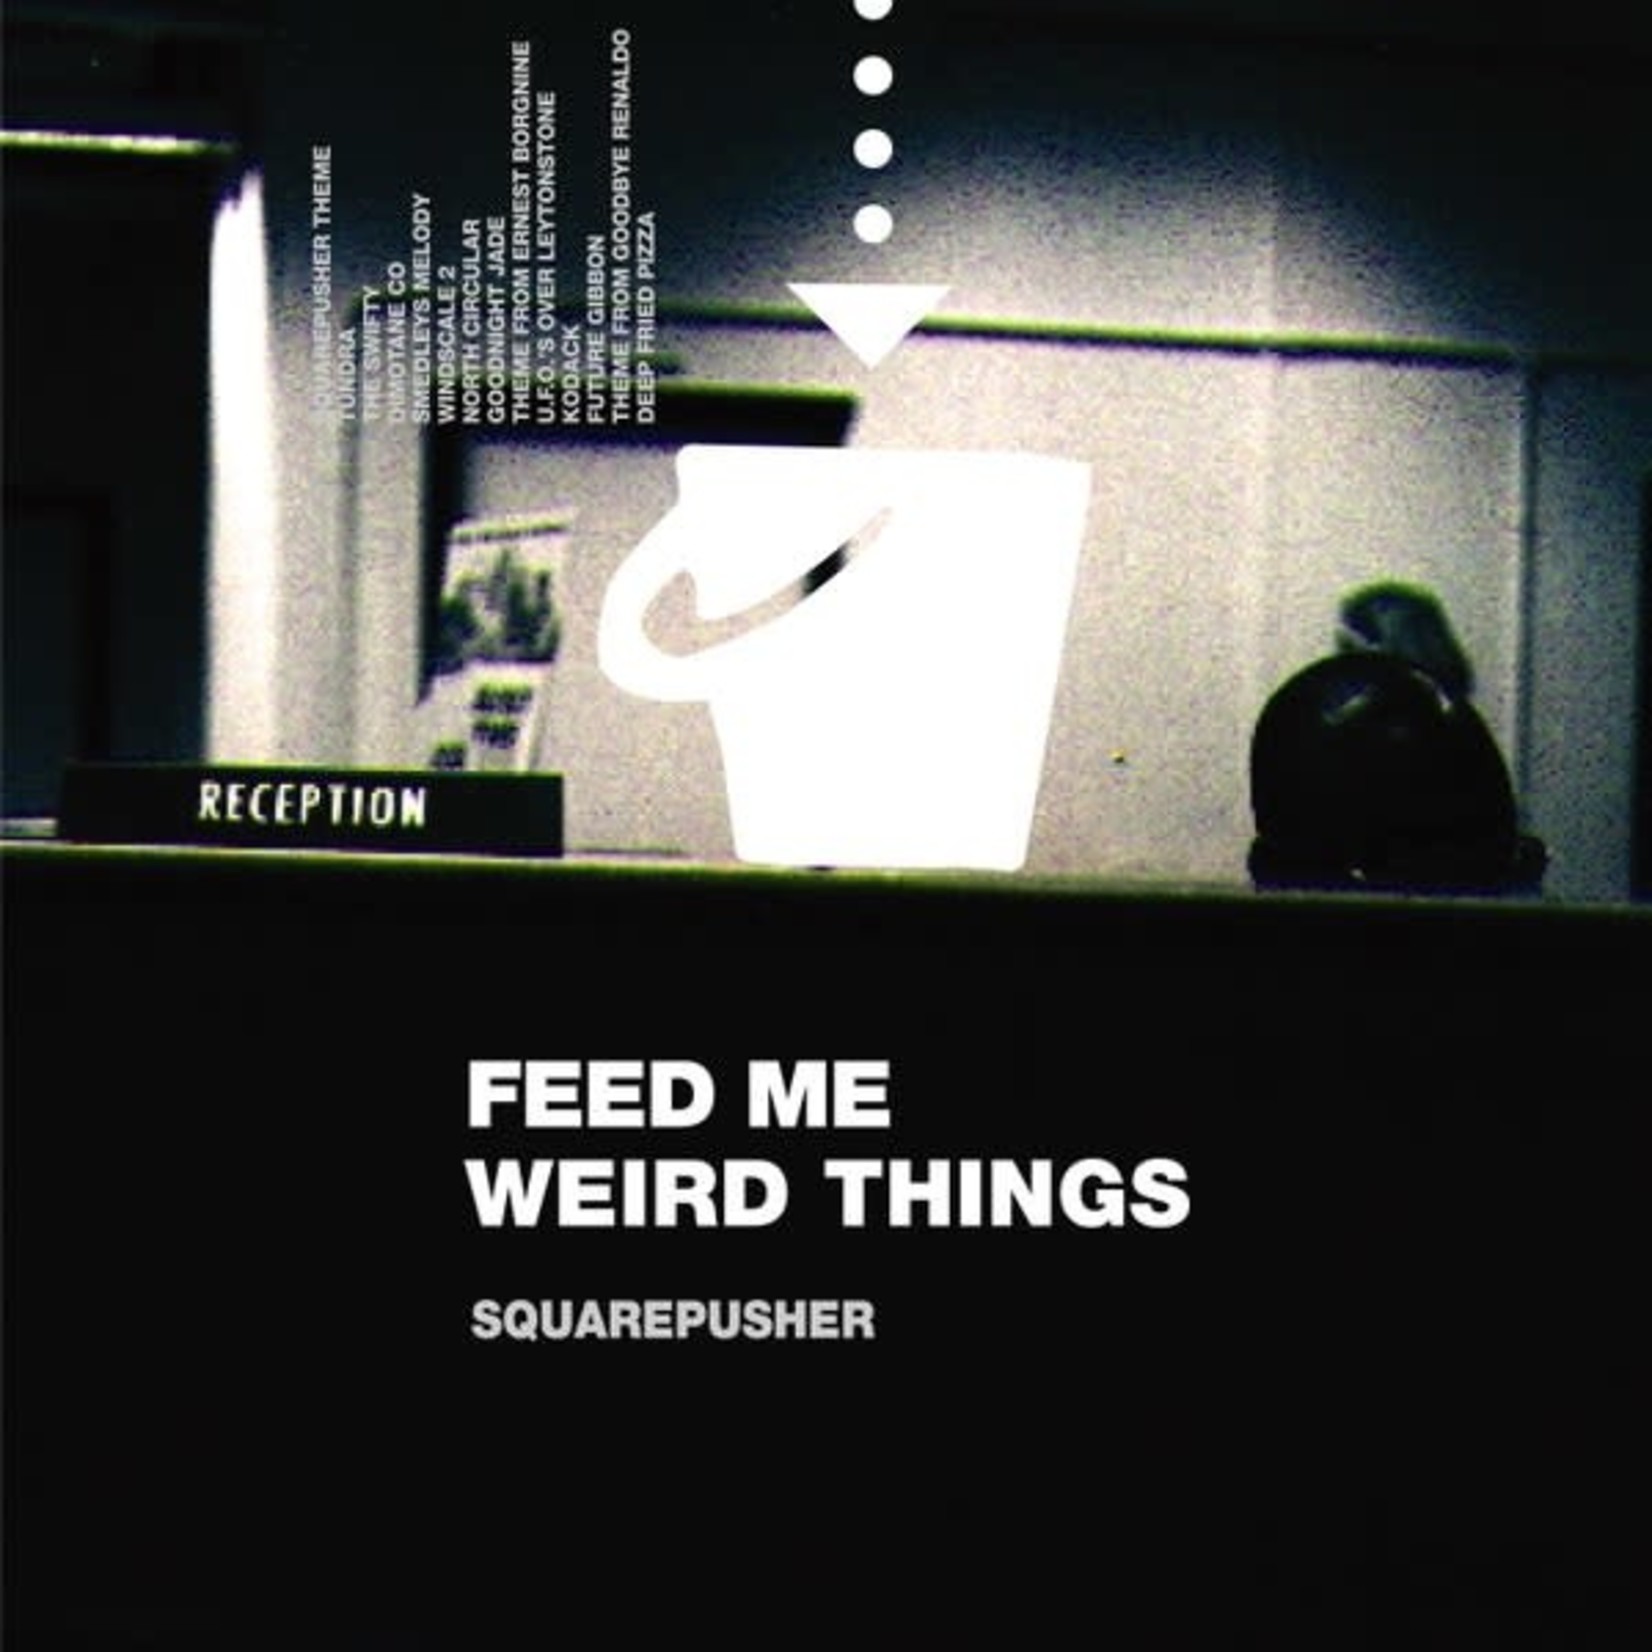 [New] Squarepusher - Feed Me Weird Things (2LP+10")